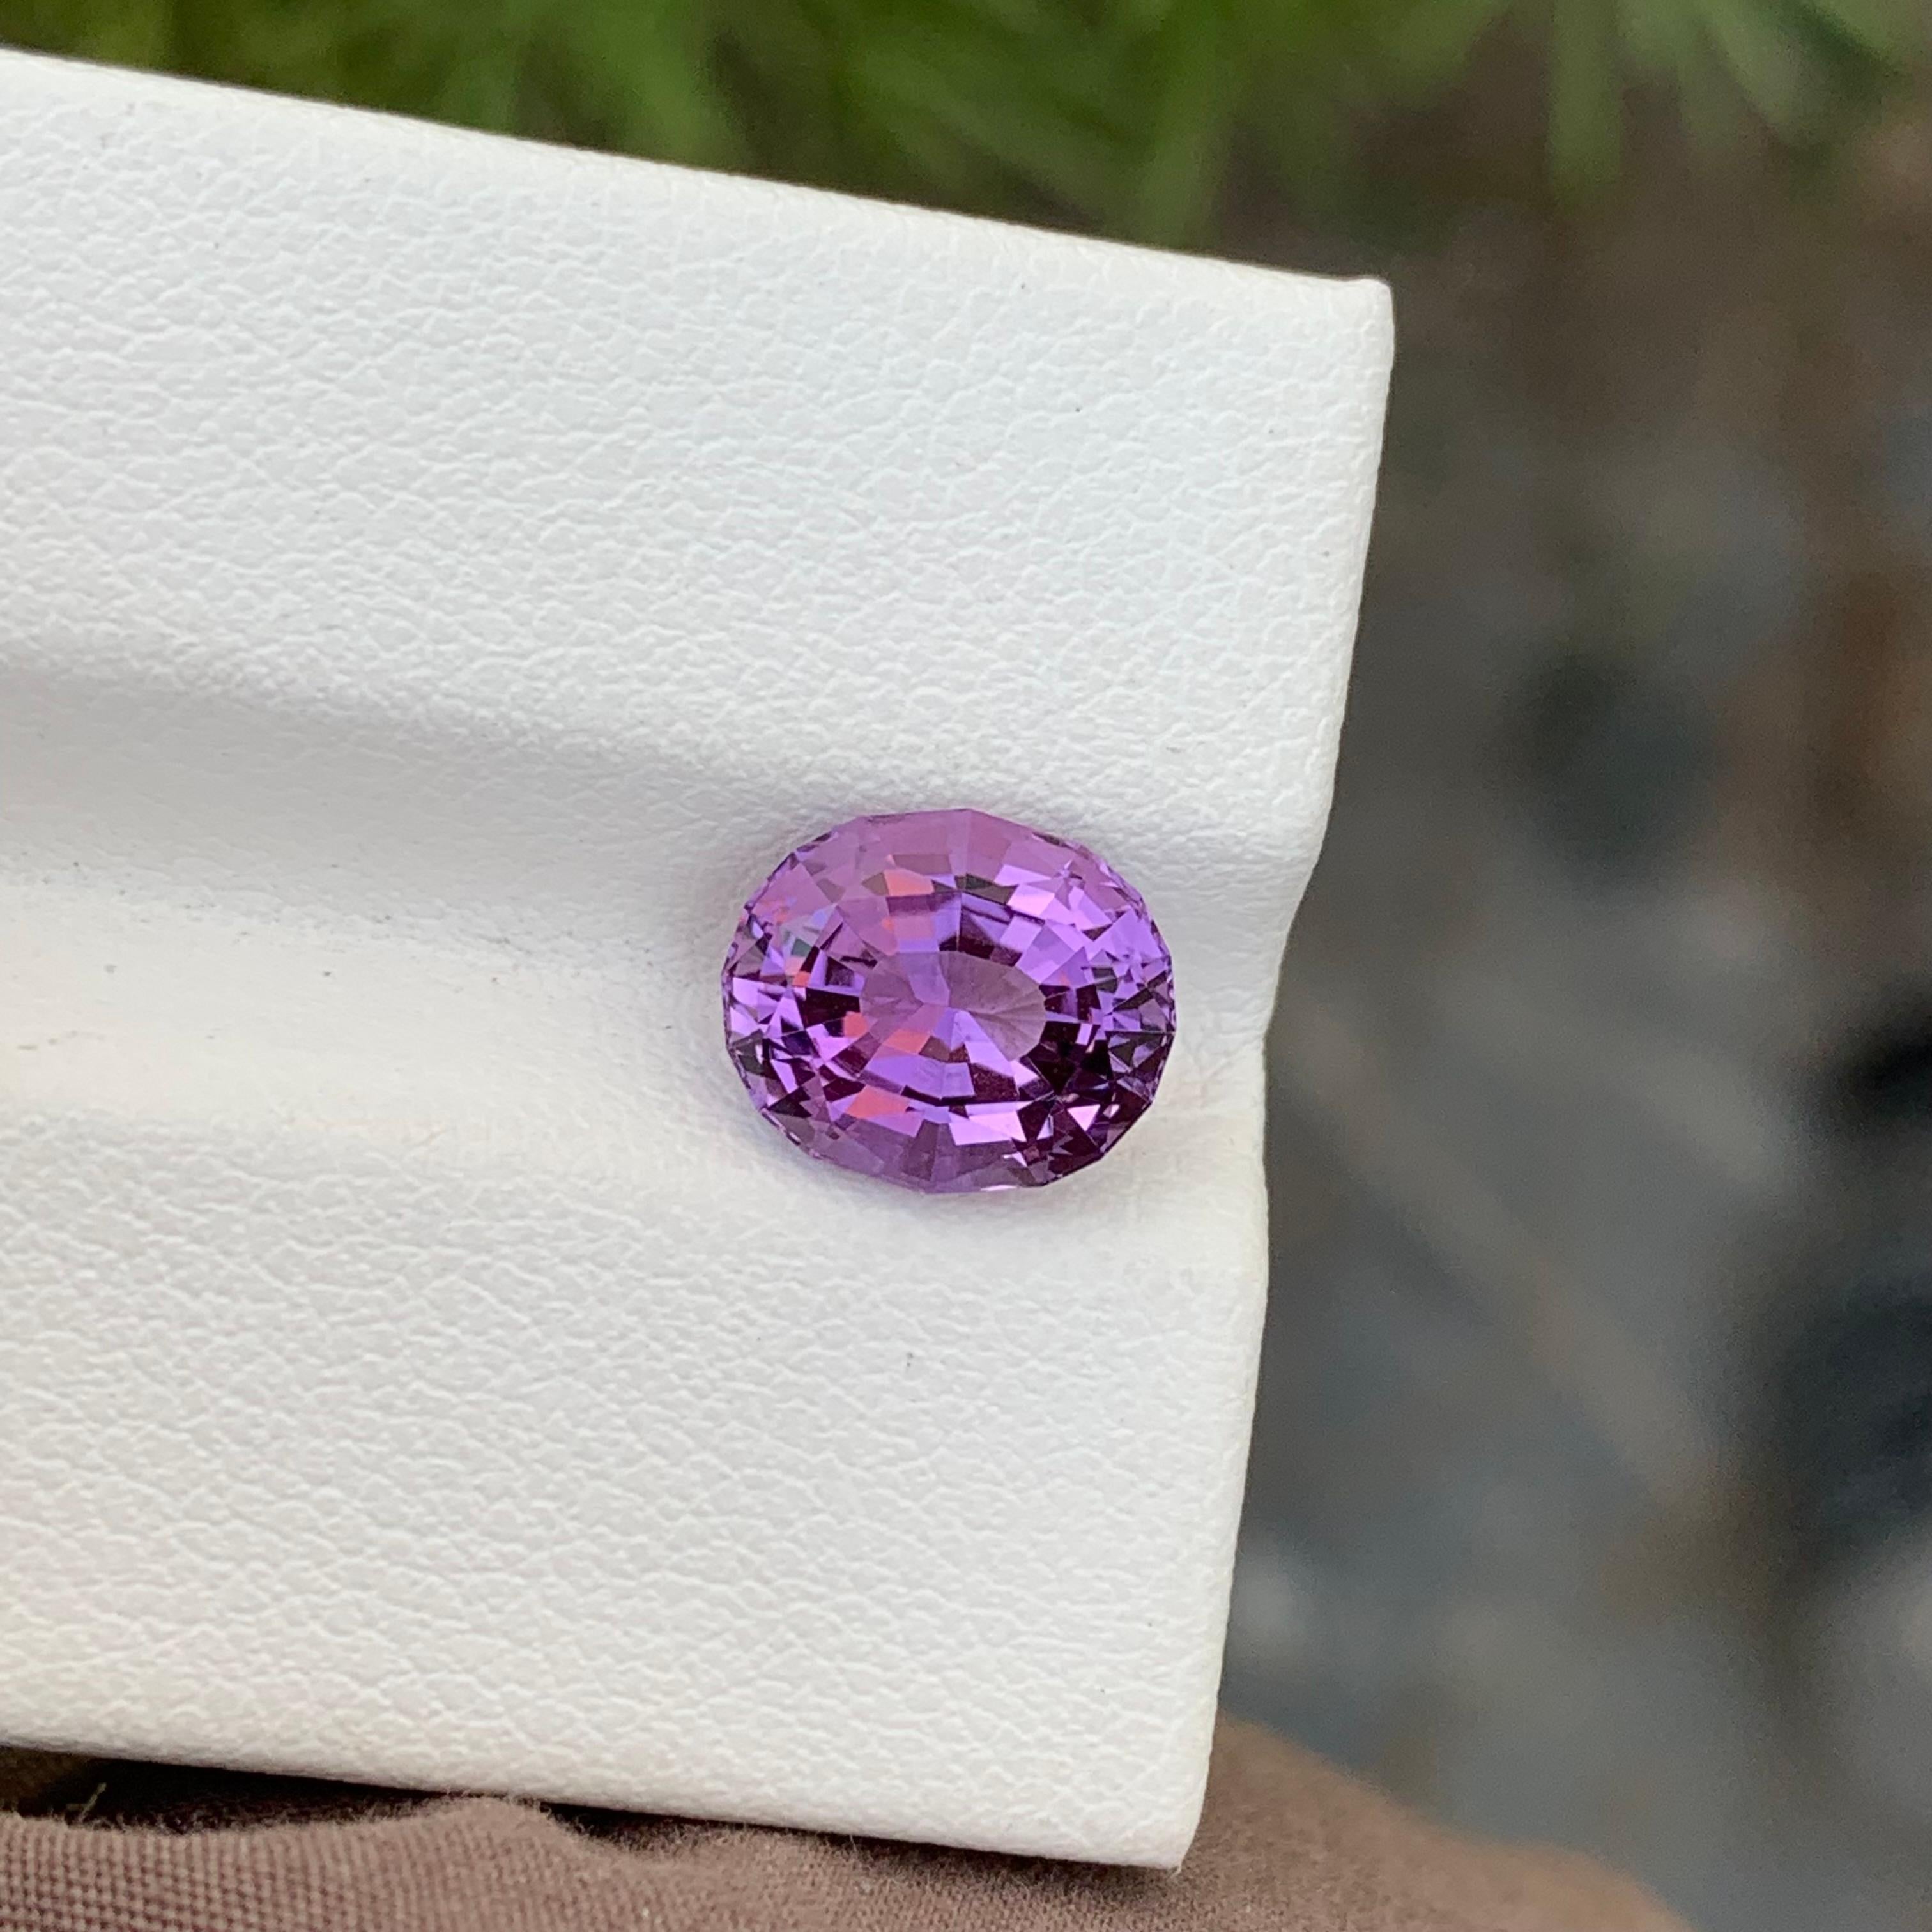 Loose Amethyst
Weight: 2.50 Carats
Dimension: 9.5 x 8.1 x 6 Mm
Colour: Purple
Origin: Brazil
Treatment: Non
Certificate: On Demand
Shape: Oval

Amethyst, a stunning variety of quartz known for its mesmerizing purple hue, has captivated humans for